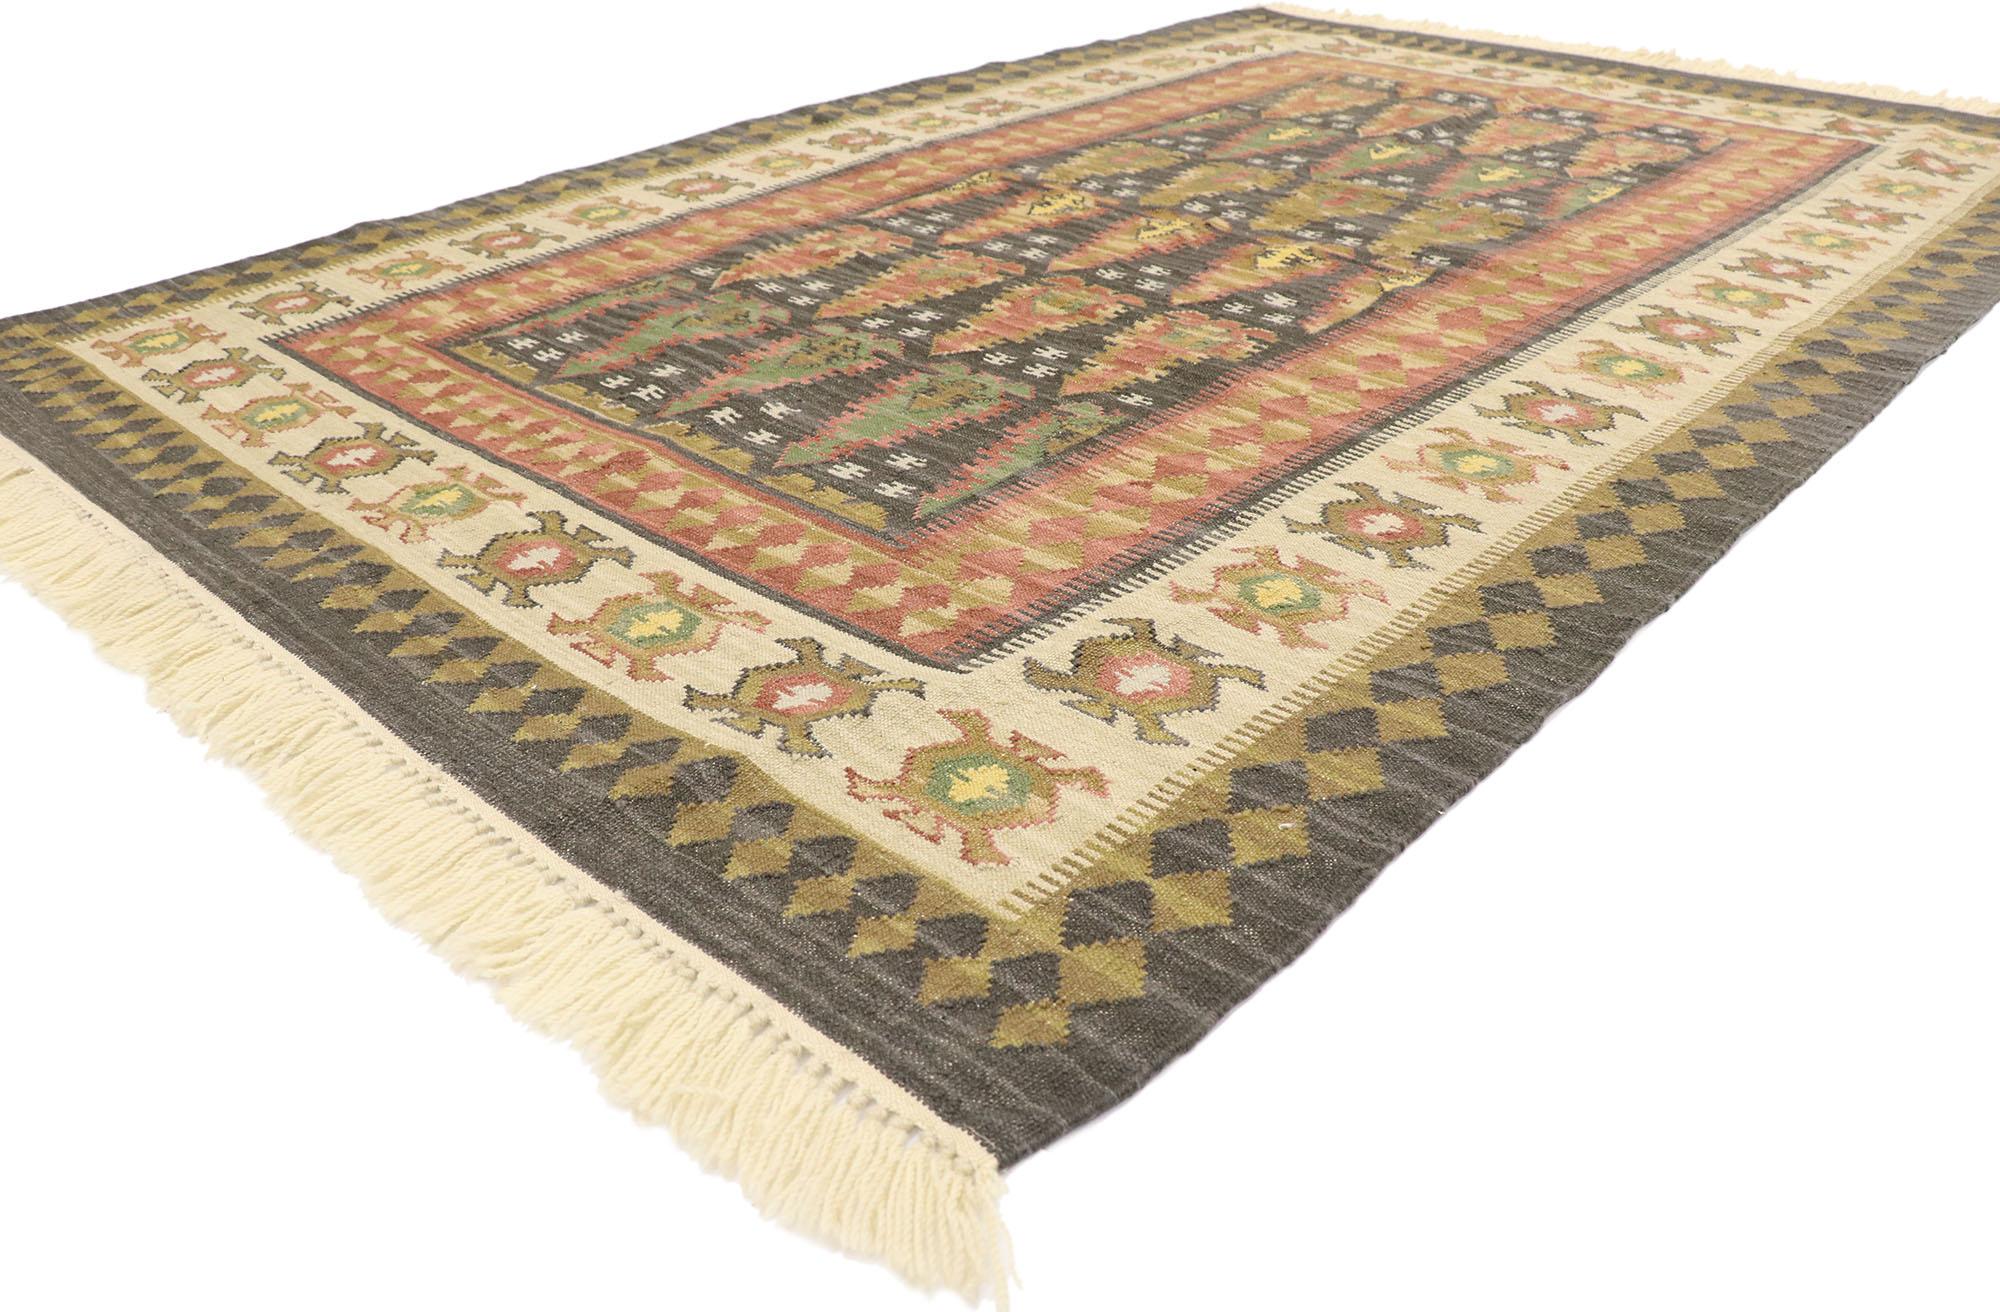 77943 Vintage Persian Kilim Rug with Modern Biophilic Design and Tribal Style, 05'04 x 08'02. Reflecting elements of nature and biophilic design, this handwoven wool Persian Kilim rug is a captivating vision of woven beauty. The abrashed charcoal